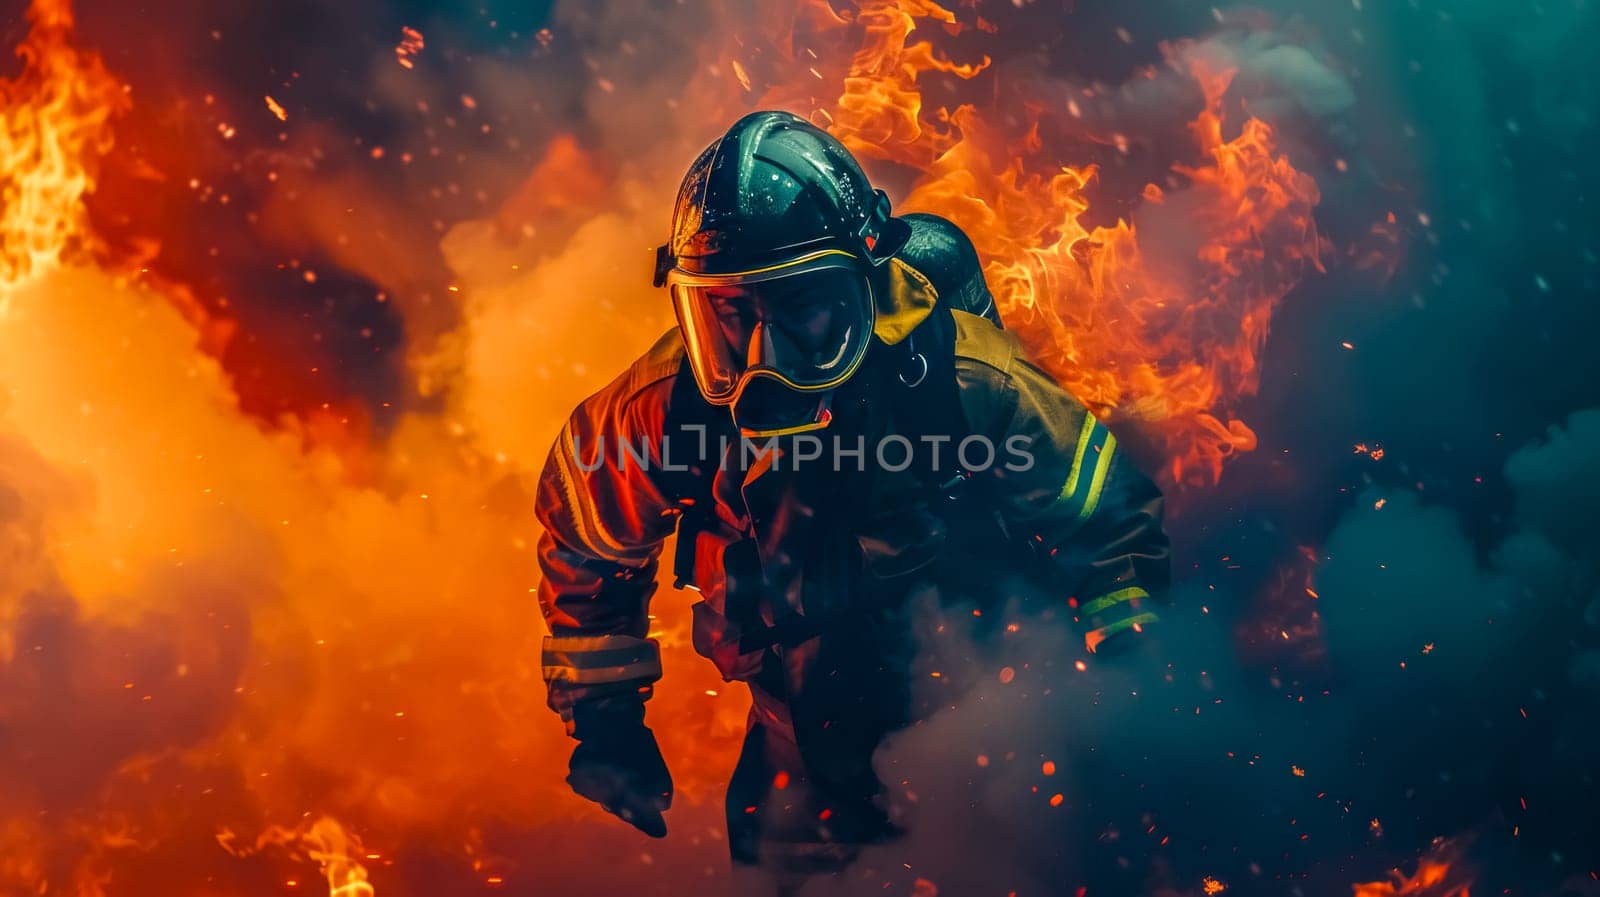 Courageous firefighter advances through roaring flames, showcasing heroism and determination